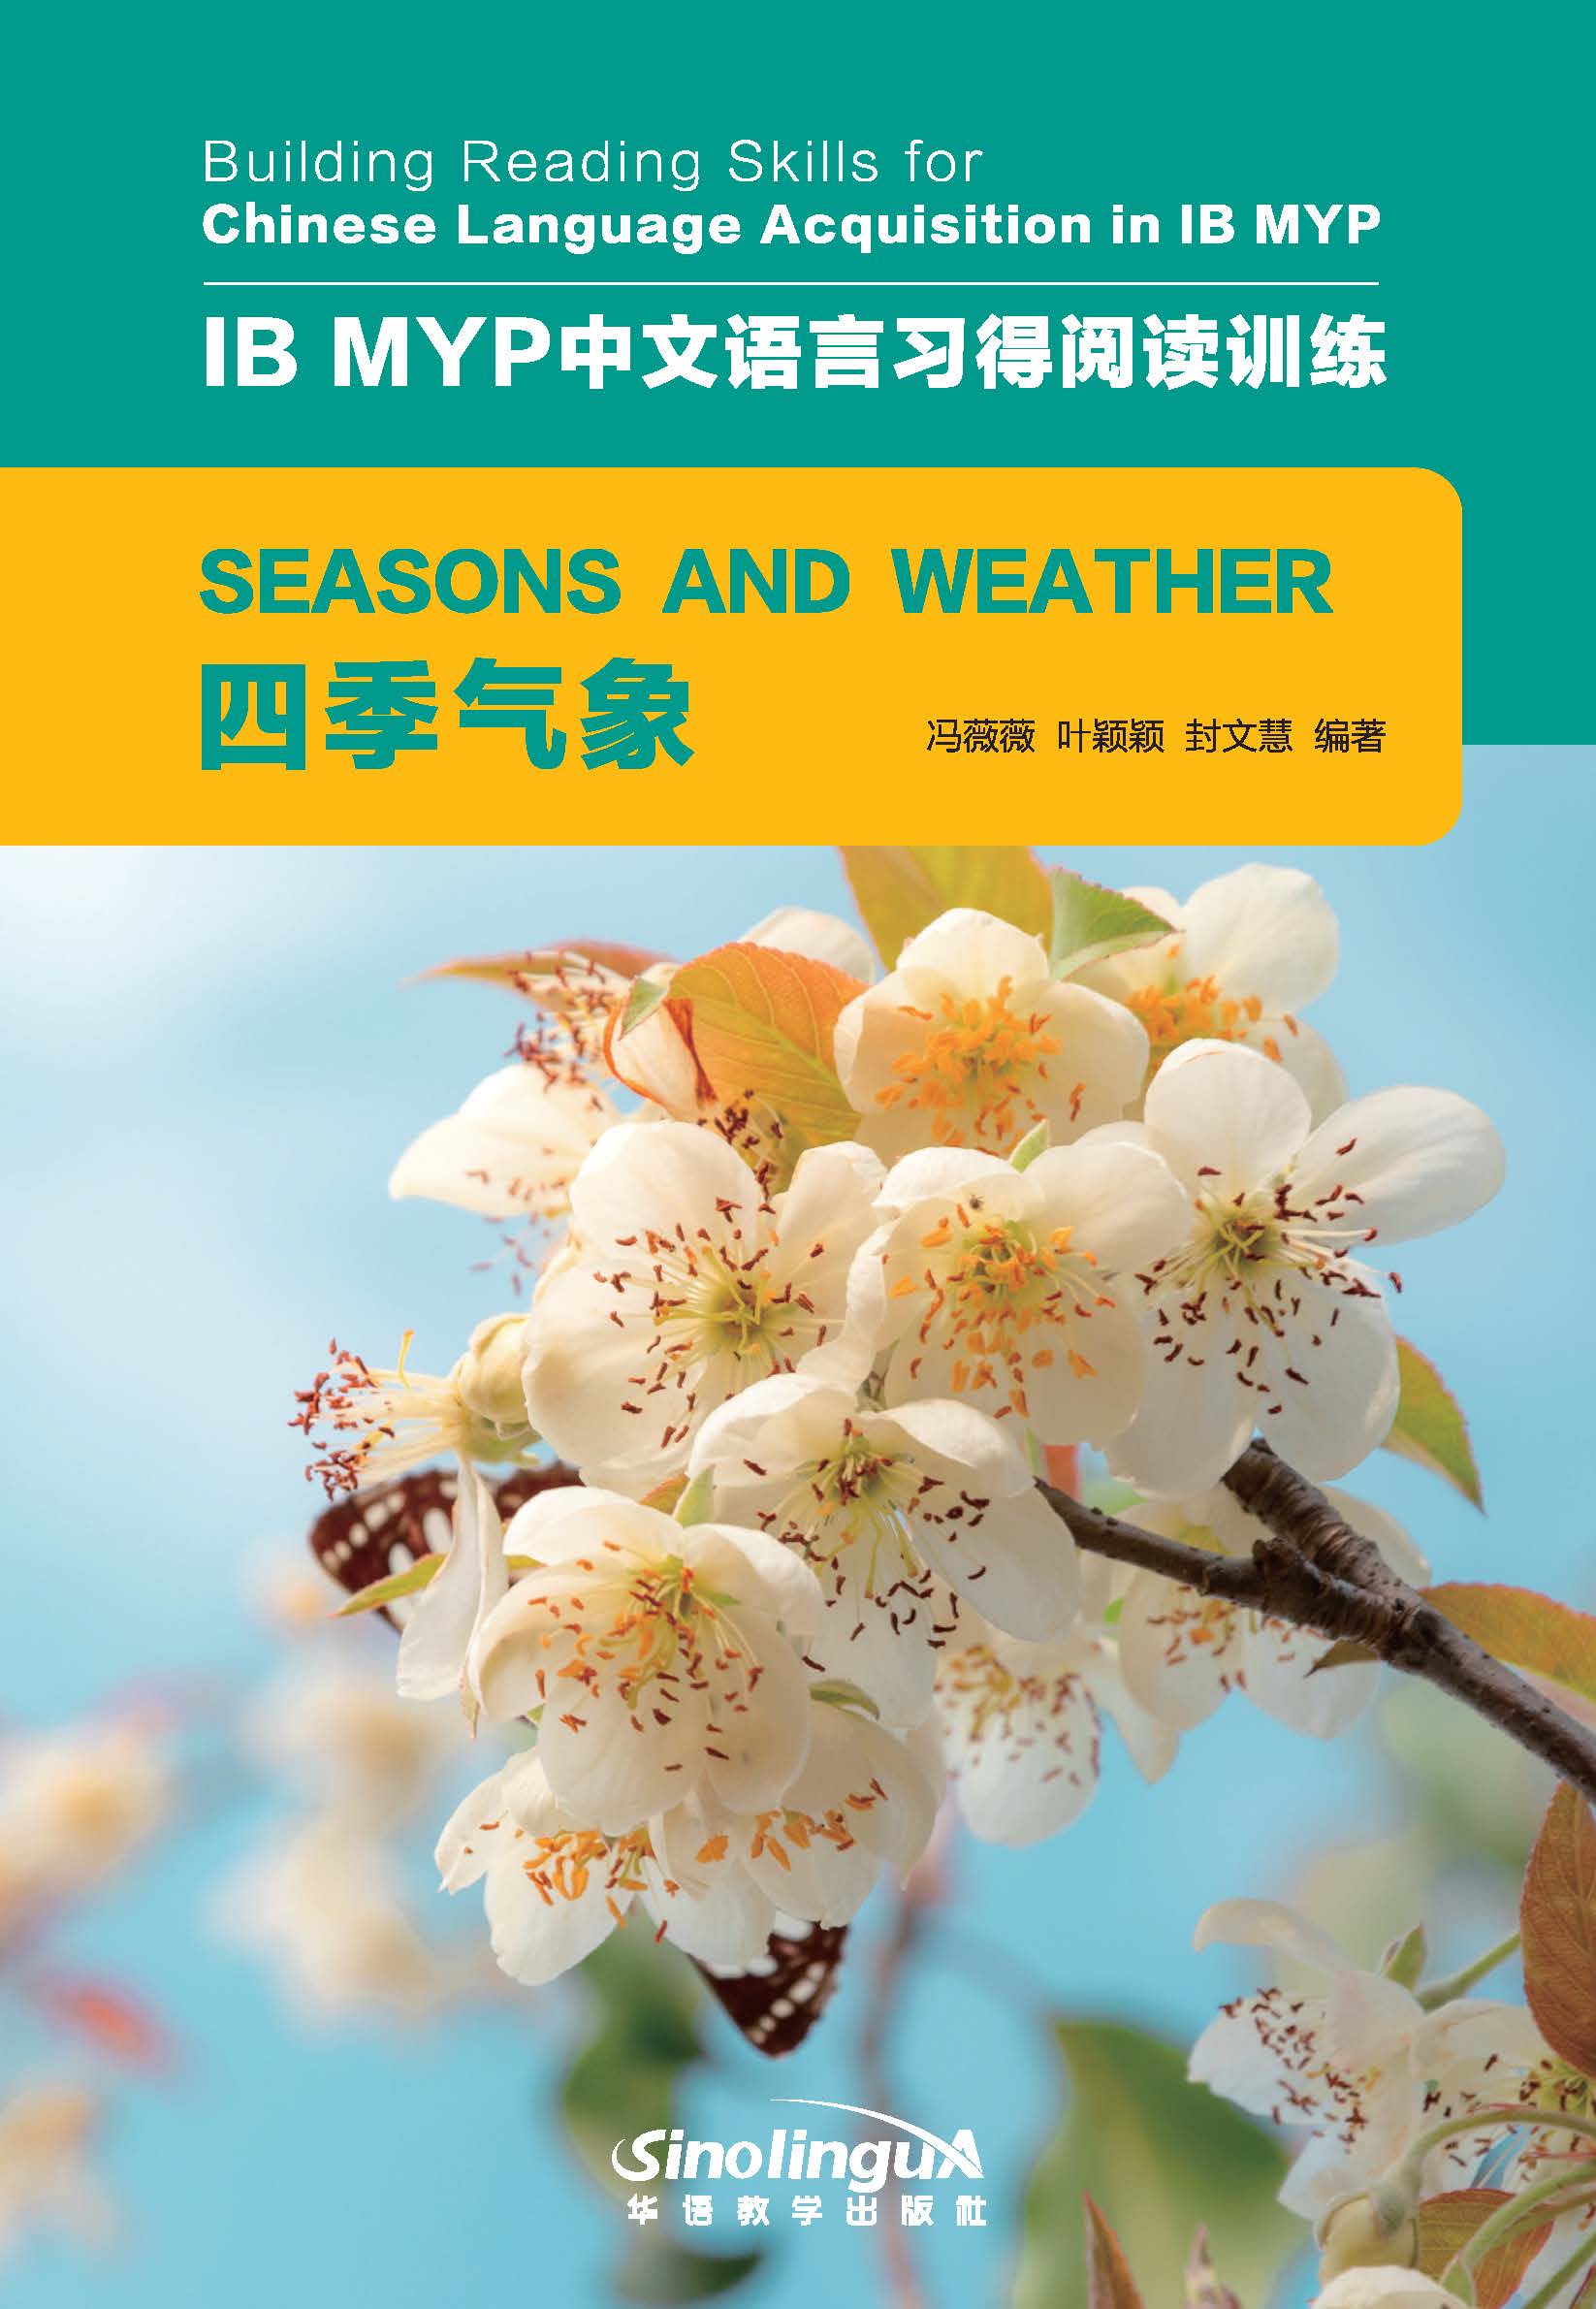 IB MYP中文语言习得阅读训练：四季气象  Building Reading Skills for Chinese Language Acquisition in IB MYP : Seasons and Weather